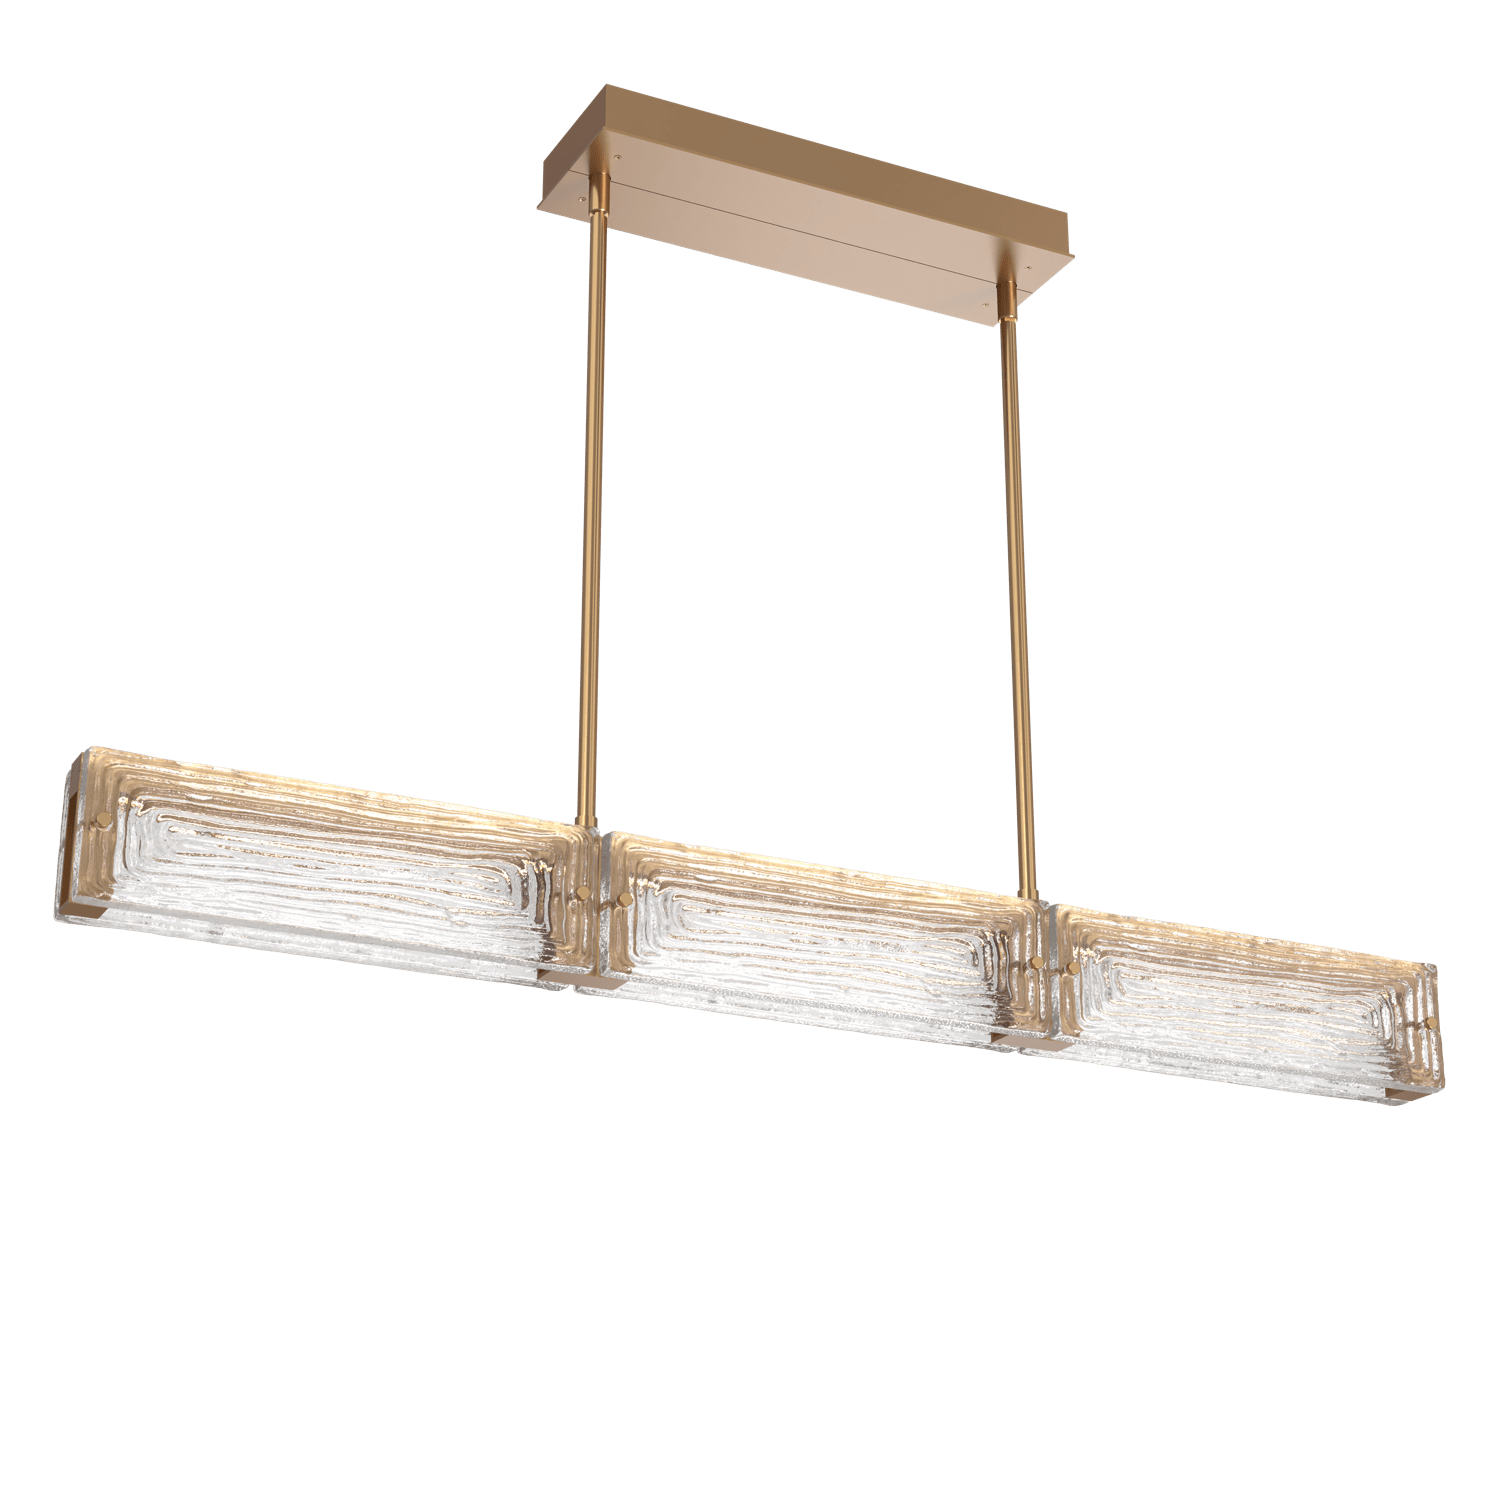 PLB0090-43-NB-TL-Hammerton-Studio-Tabulo-43-inch-linear-chandelier-with-novel-brass-finish-and-clear-linea-cast-glass-shade-and-LED-lamping